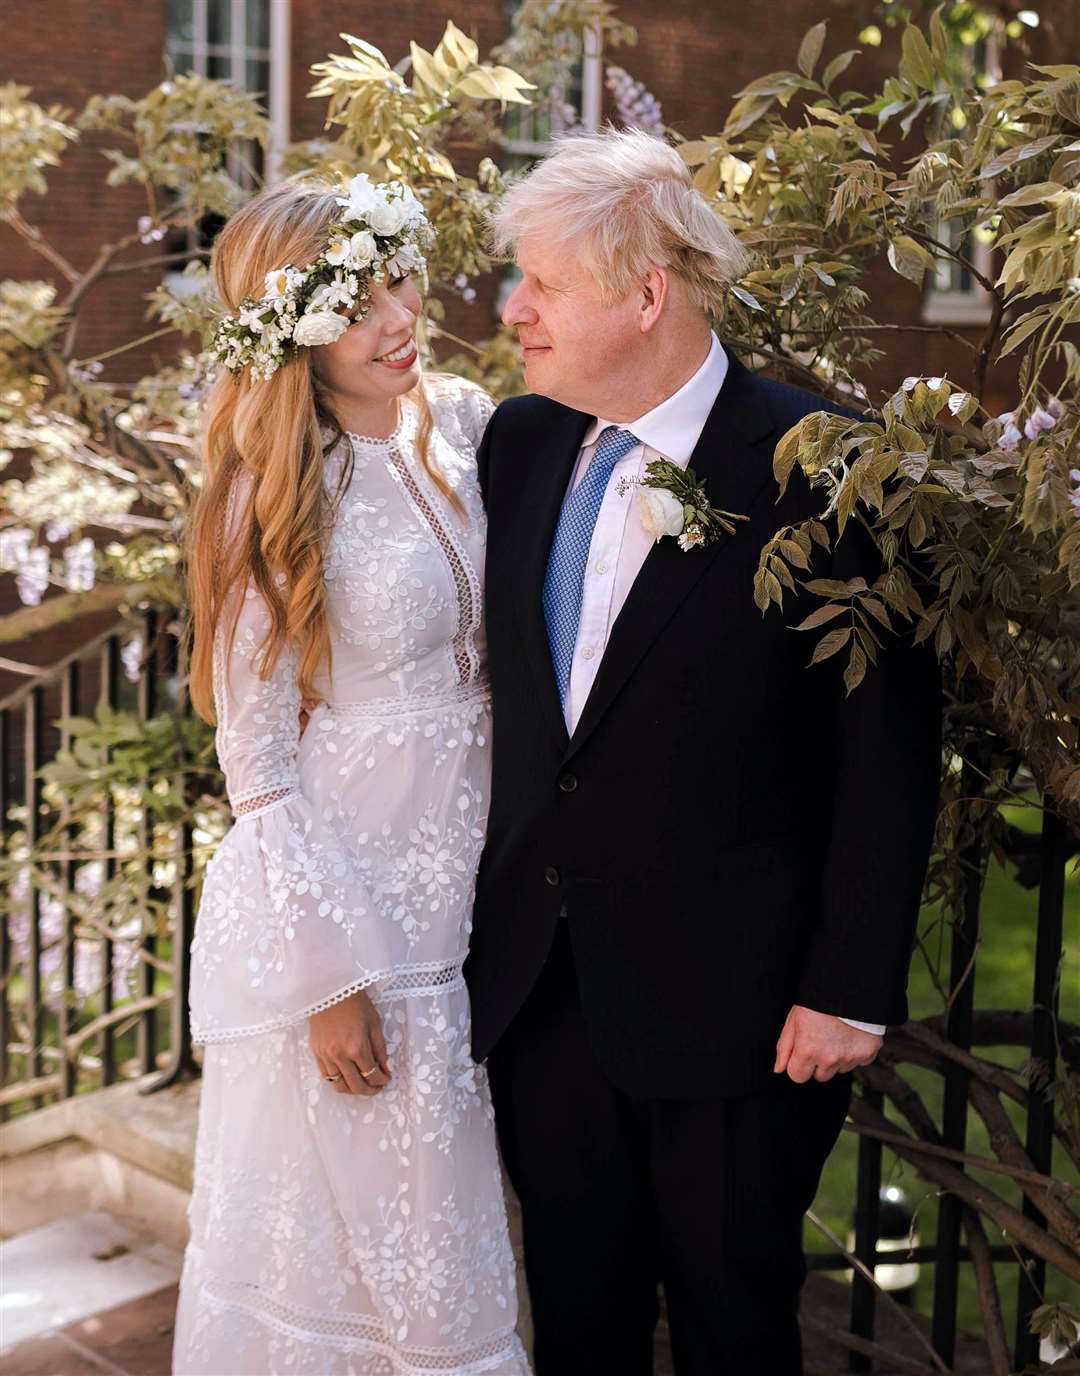 Boris Johnson and Carrie Johnson on their wedding day in May earlier this year. (Rebecca Fulton/PA)